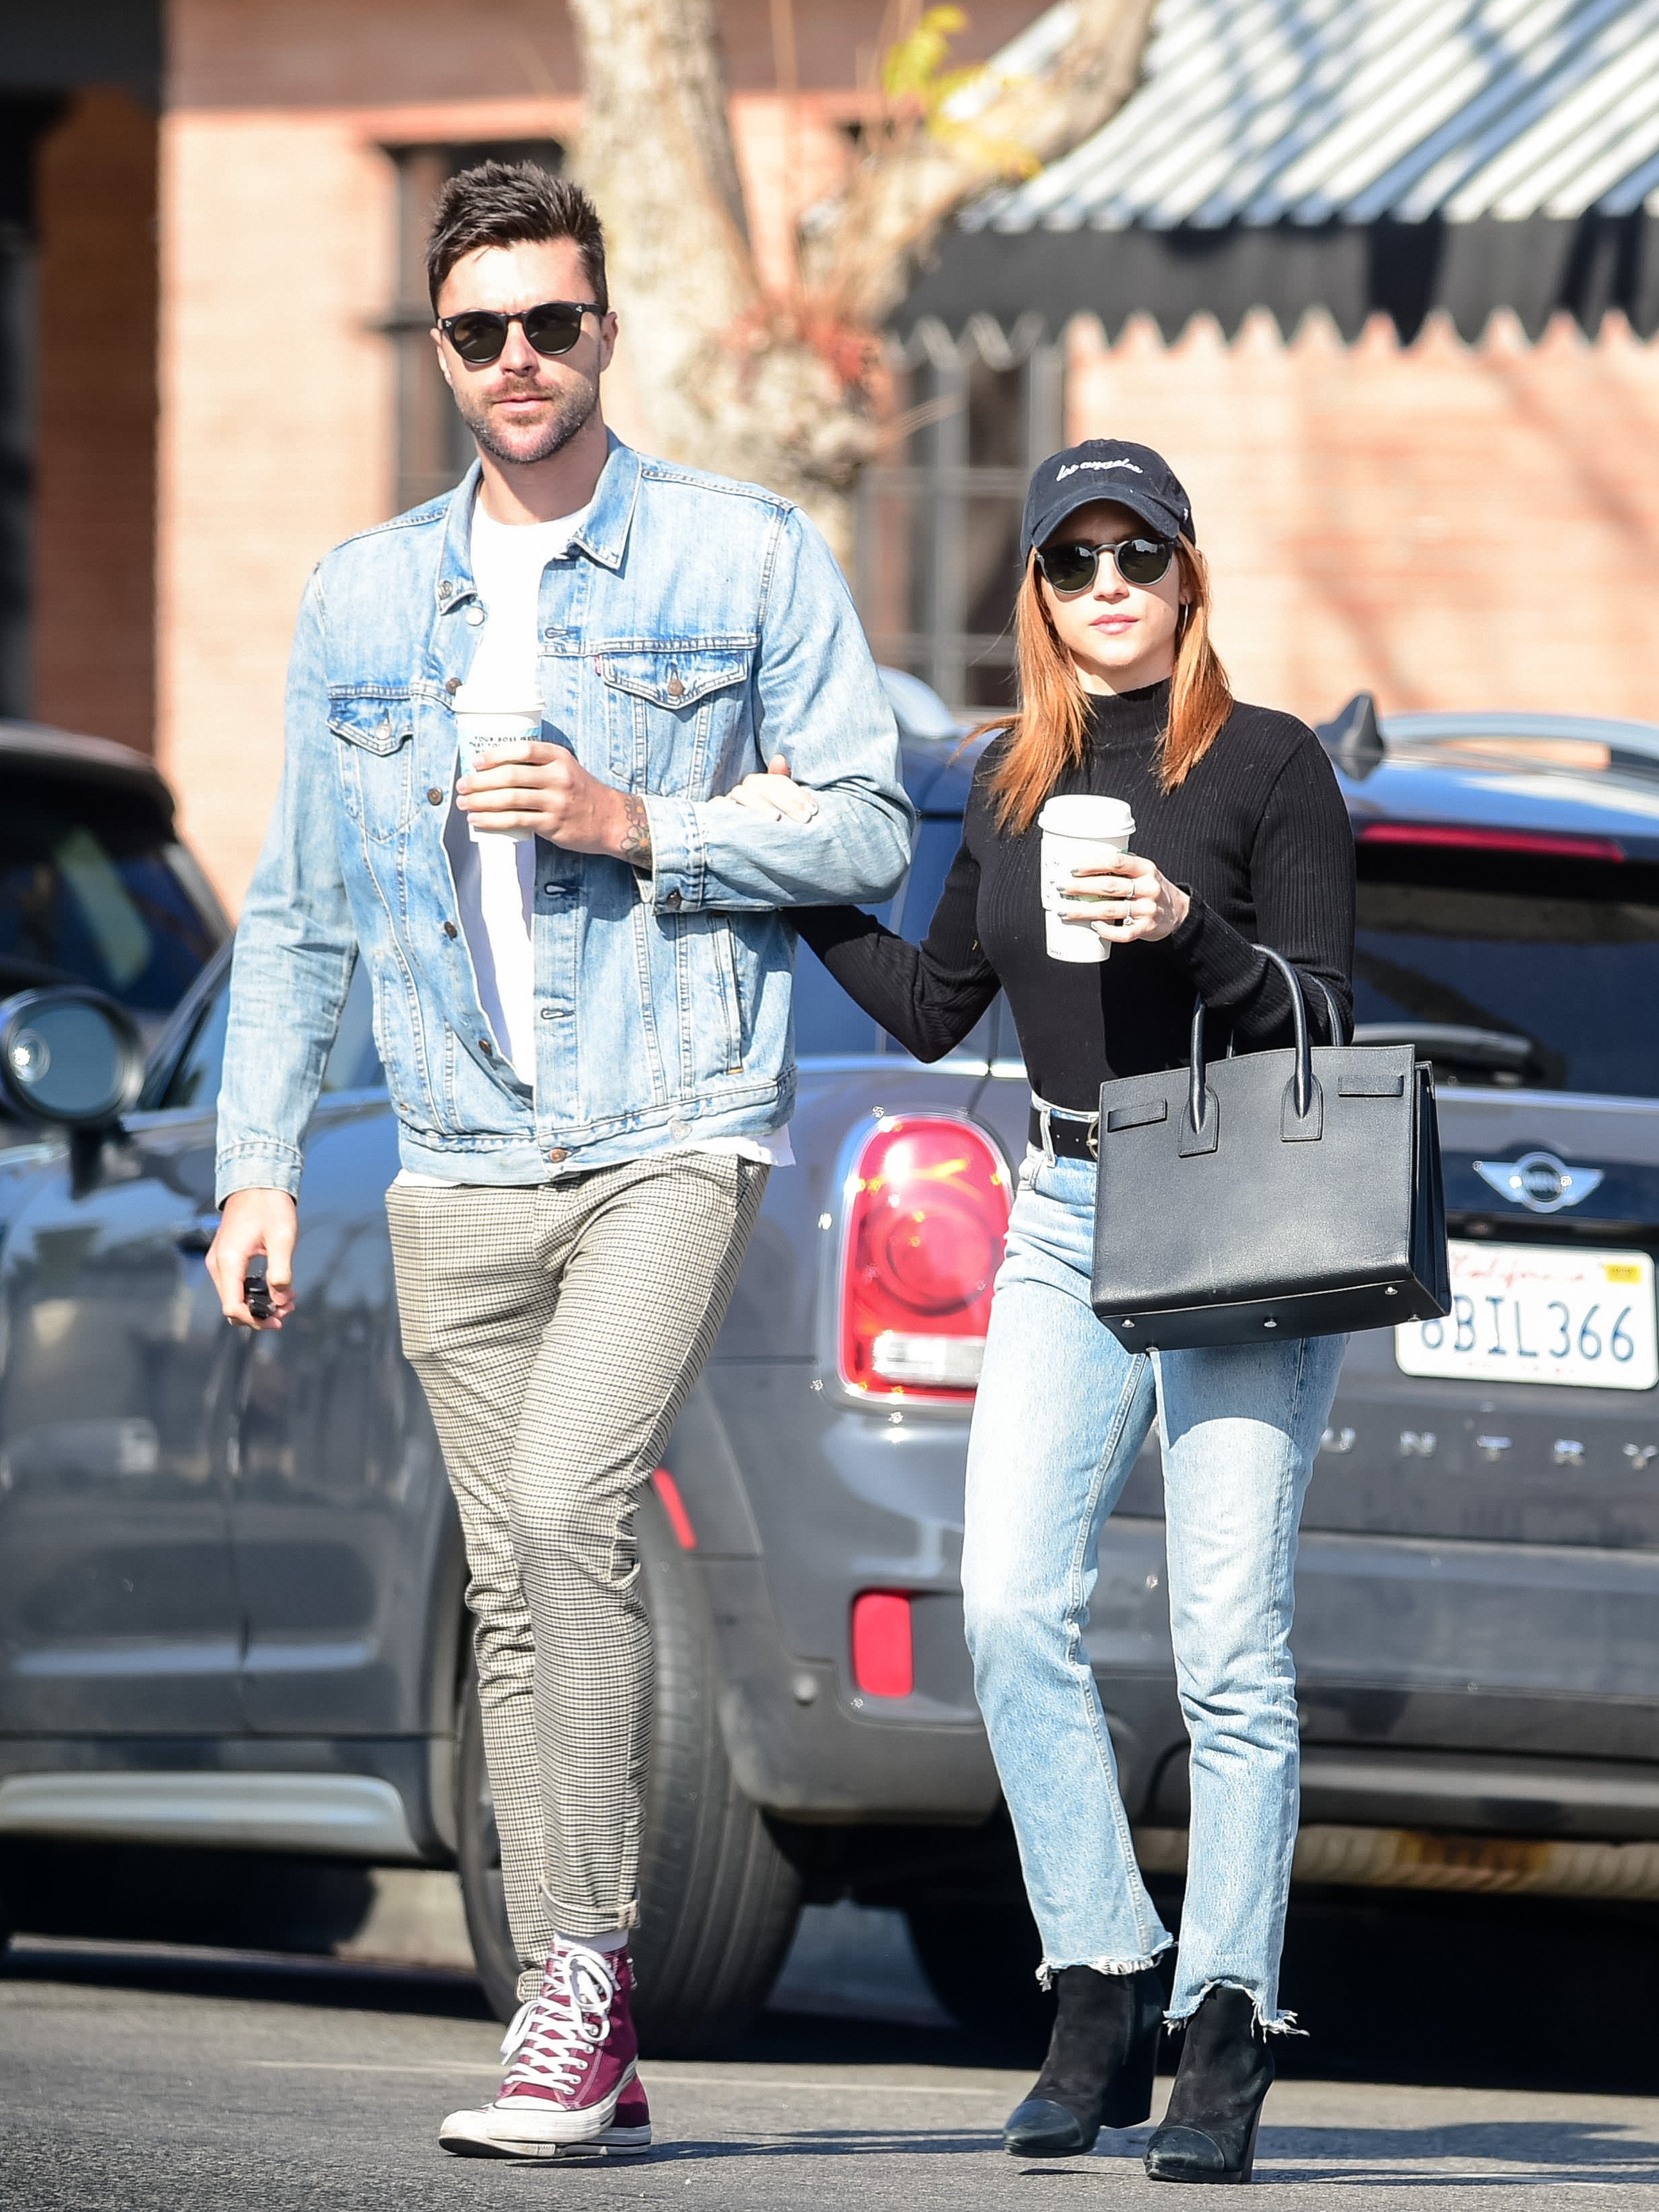 Tyler Stanaland and Brittany Snow are photographed as they walk together in Los Angeles, on January 13, 2020 | Source: Getty Images